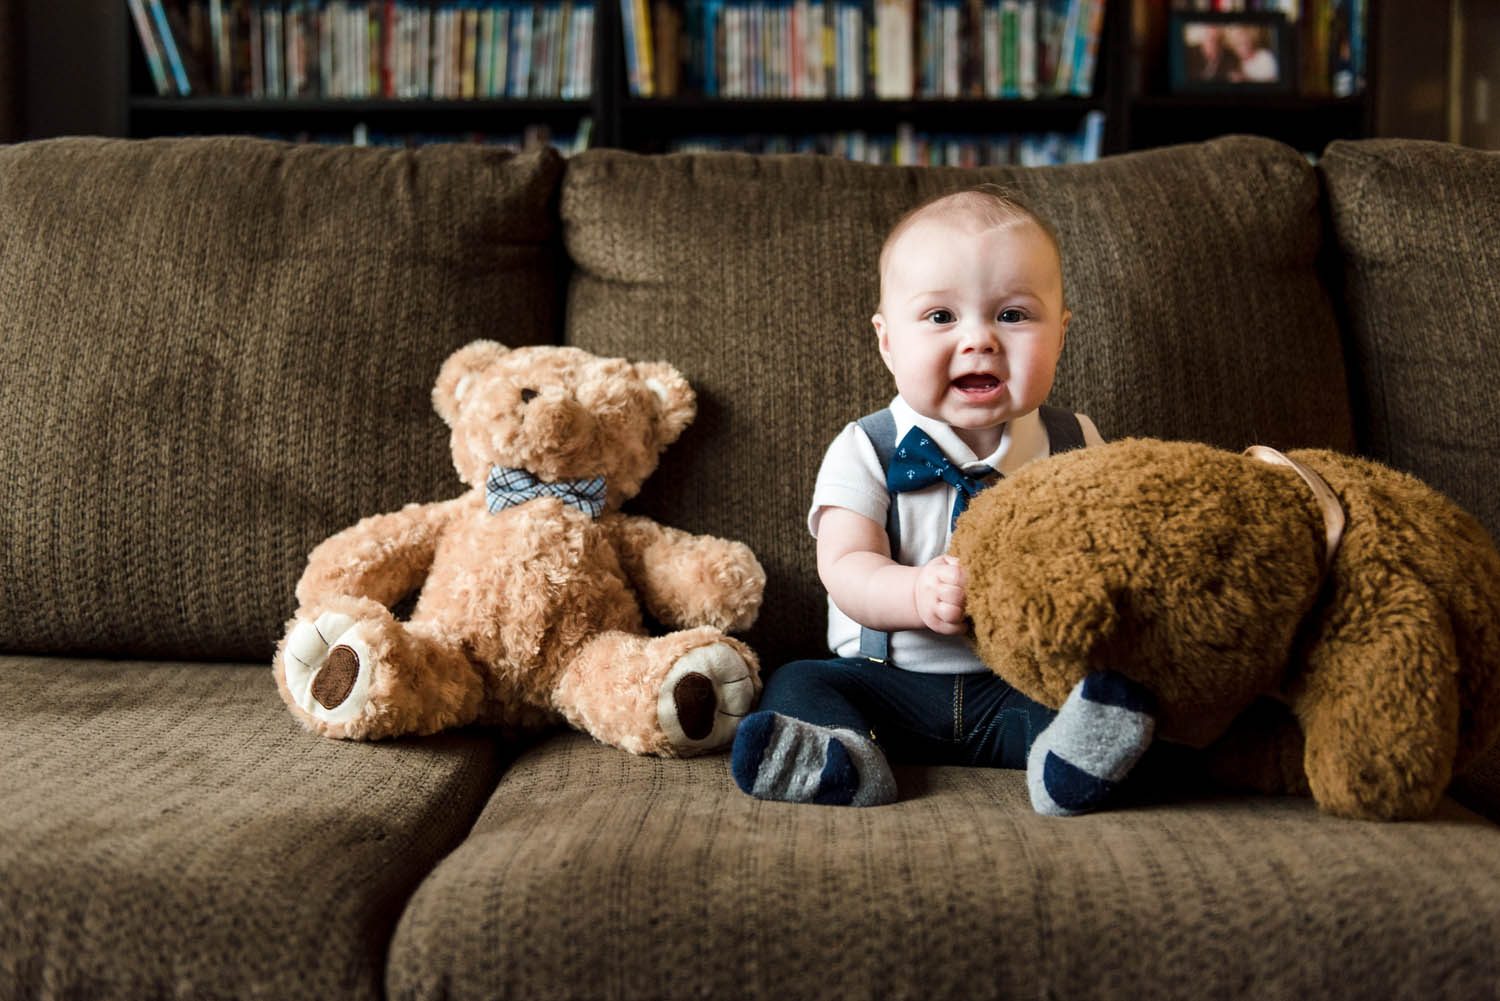 A 6 month old baby photos session in a Sherwood Park home with a smiling baby boy surrounded by heirloom teddy bears.